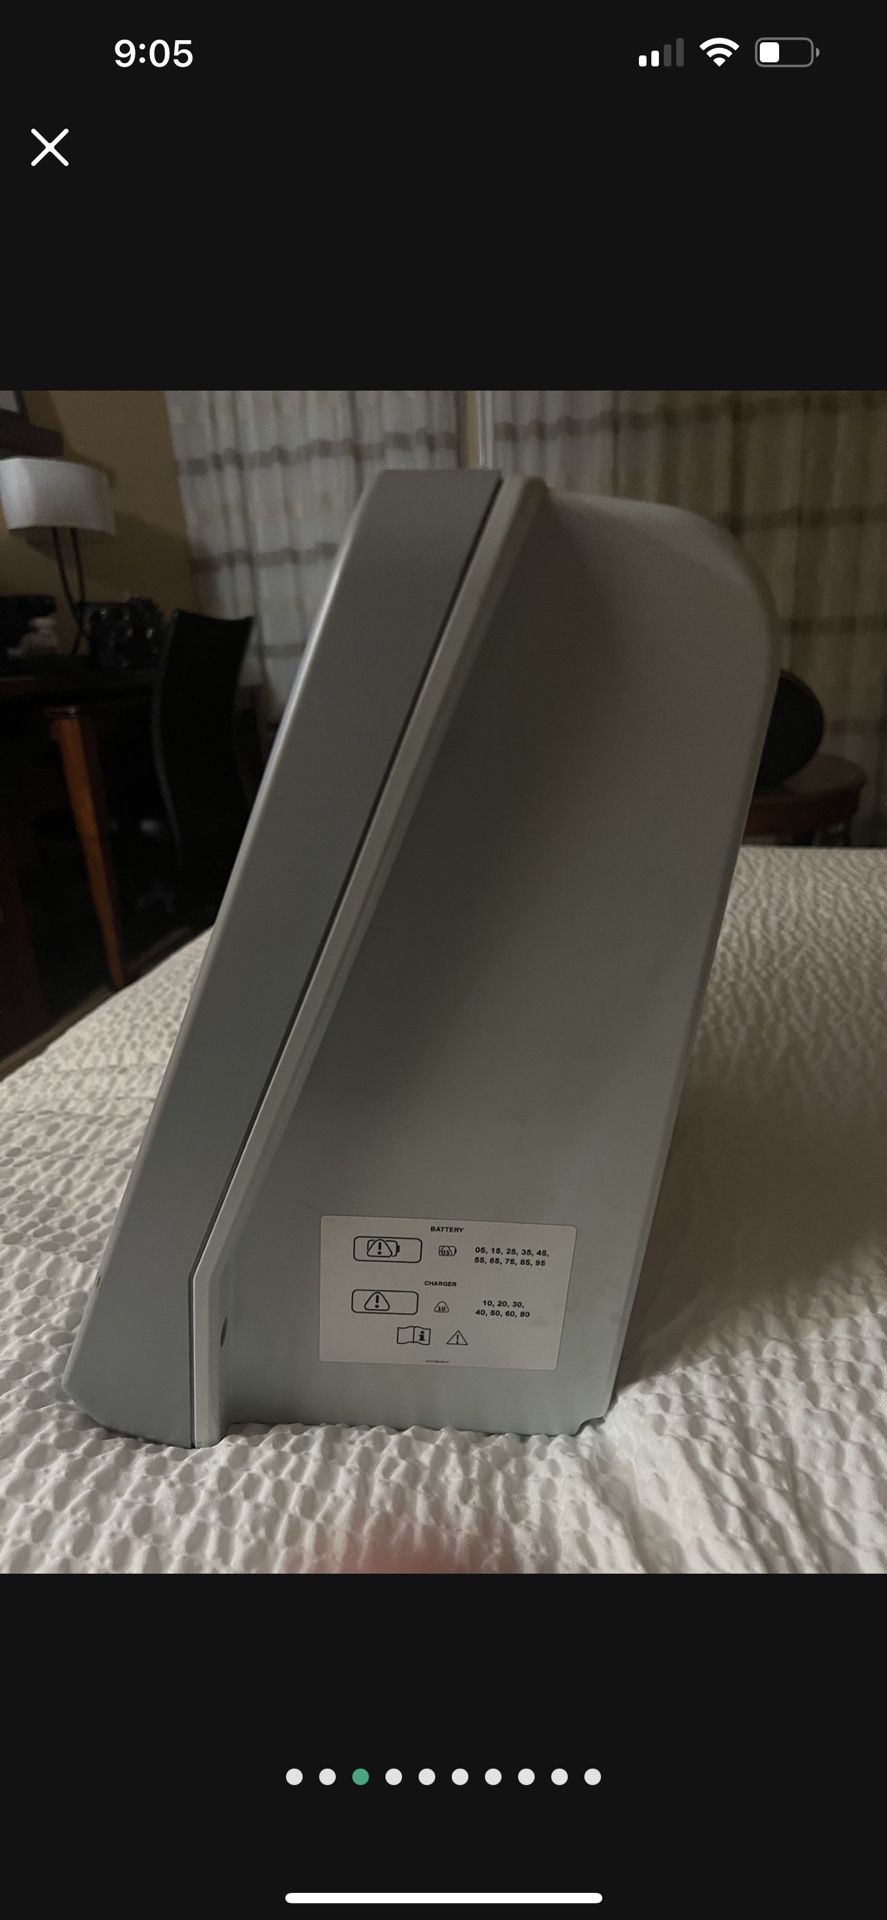 Zimmer Biomet X Series Power System - Charger For Sterilizable Battery  Medical Surgical Hospital Charging Device - WORKS PERFECTLY - 6 Batteries  Fit! for Sale in Irvine, CA - OfferUp